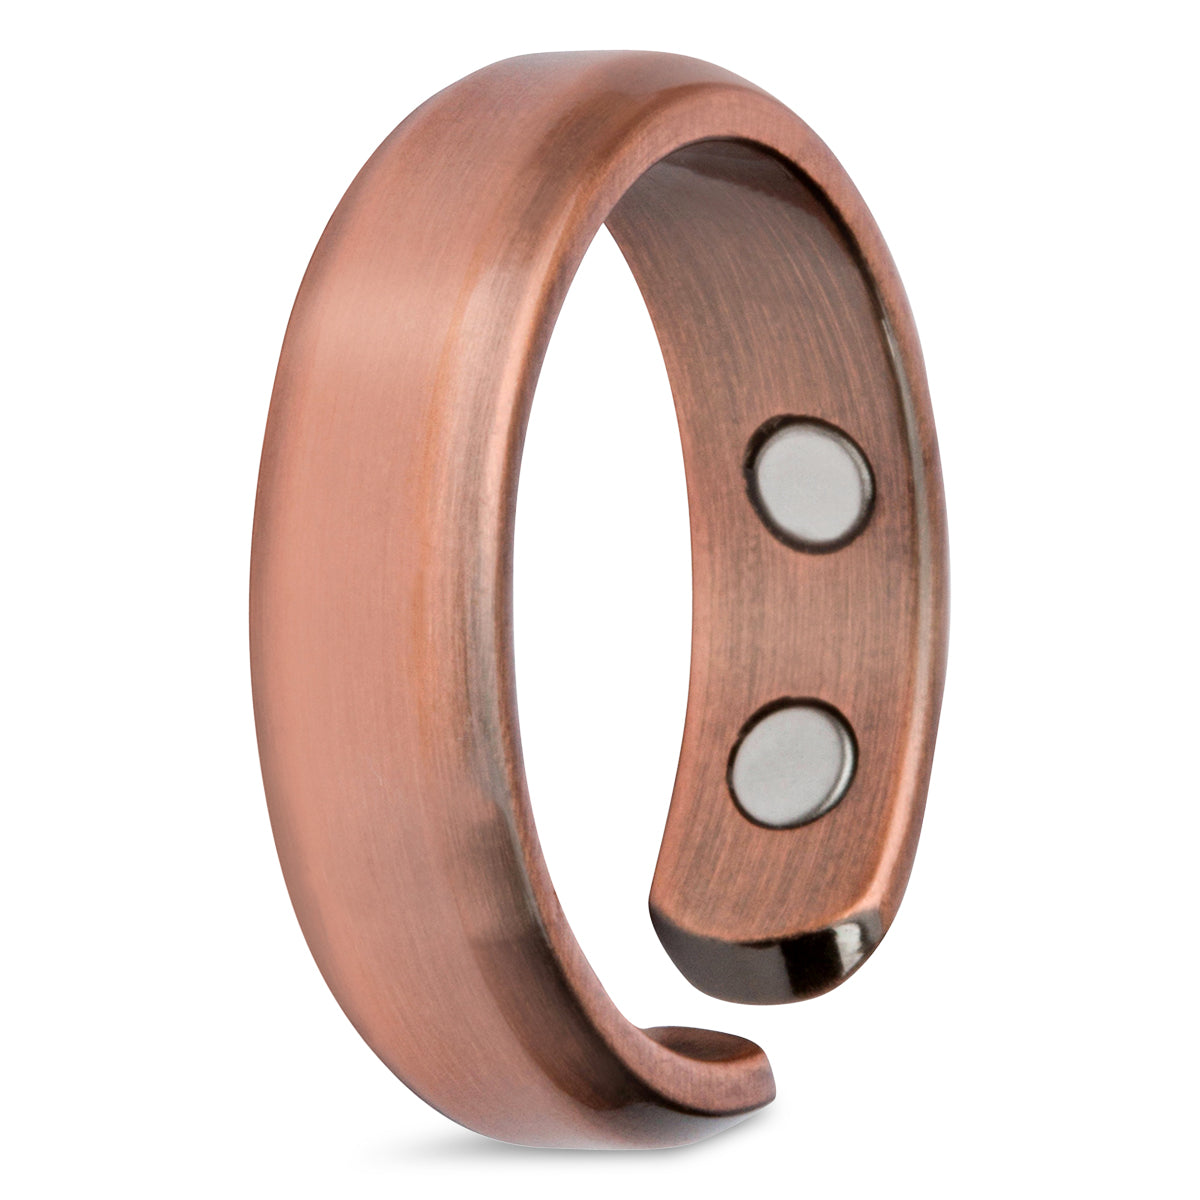 Elegant Pure Copper Magnetic Therapy Ring - Single Ring - Size 07 - Smarter LifeStyle Shop